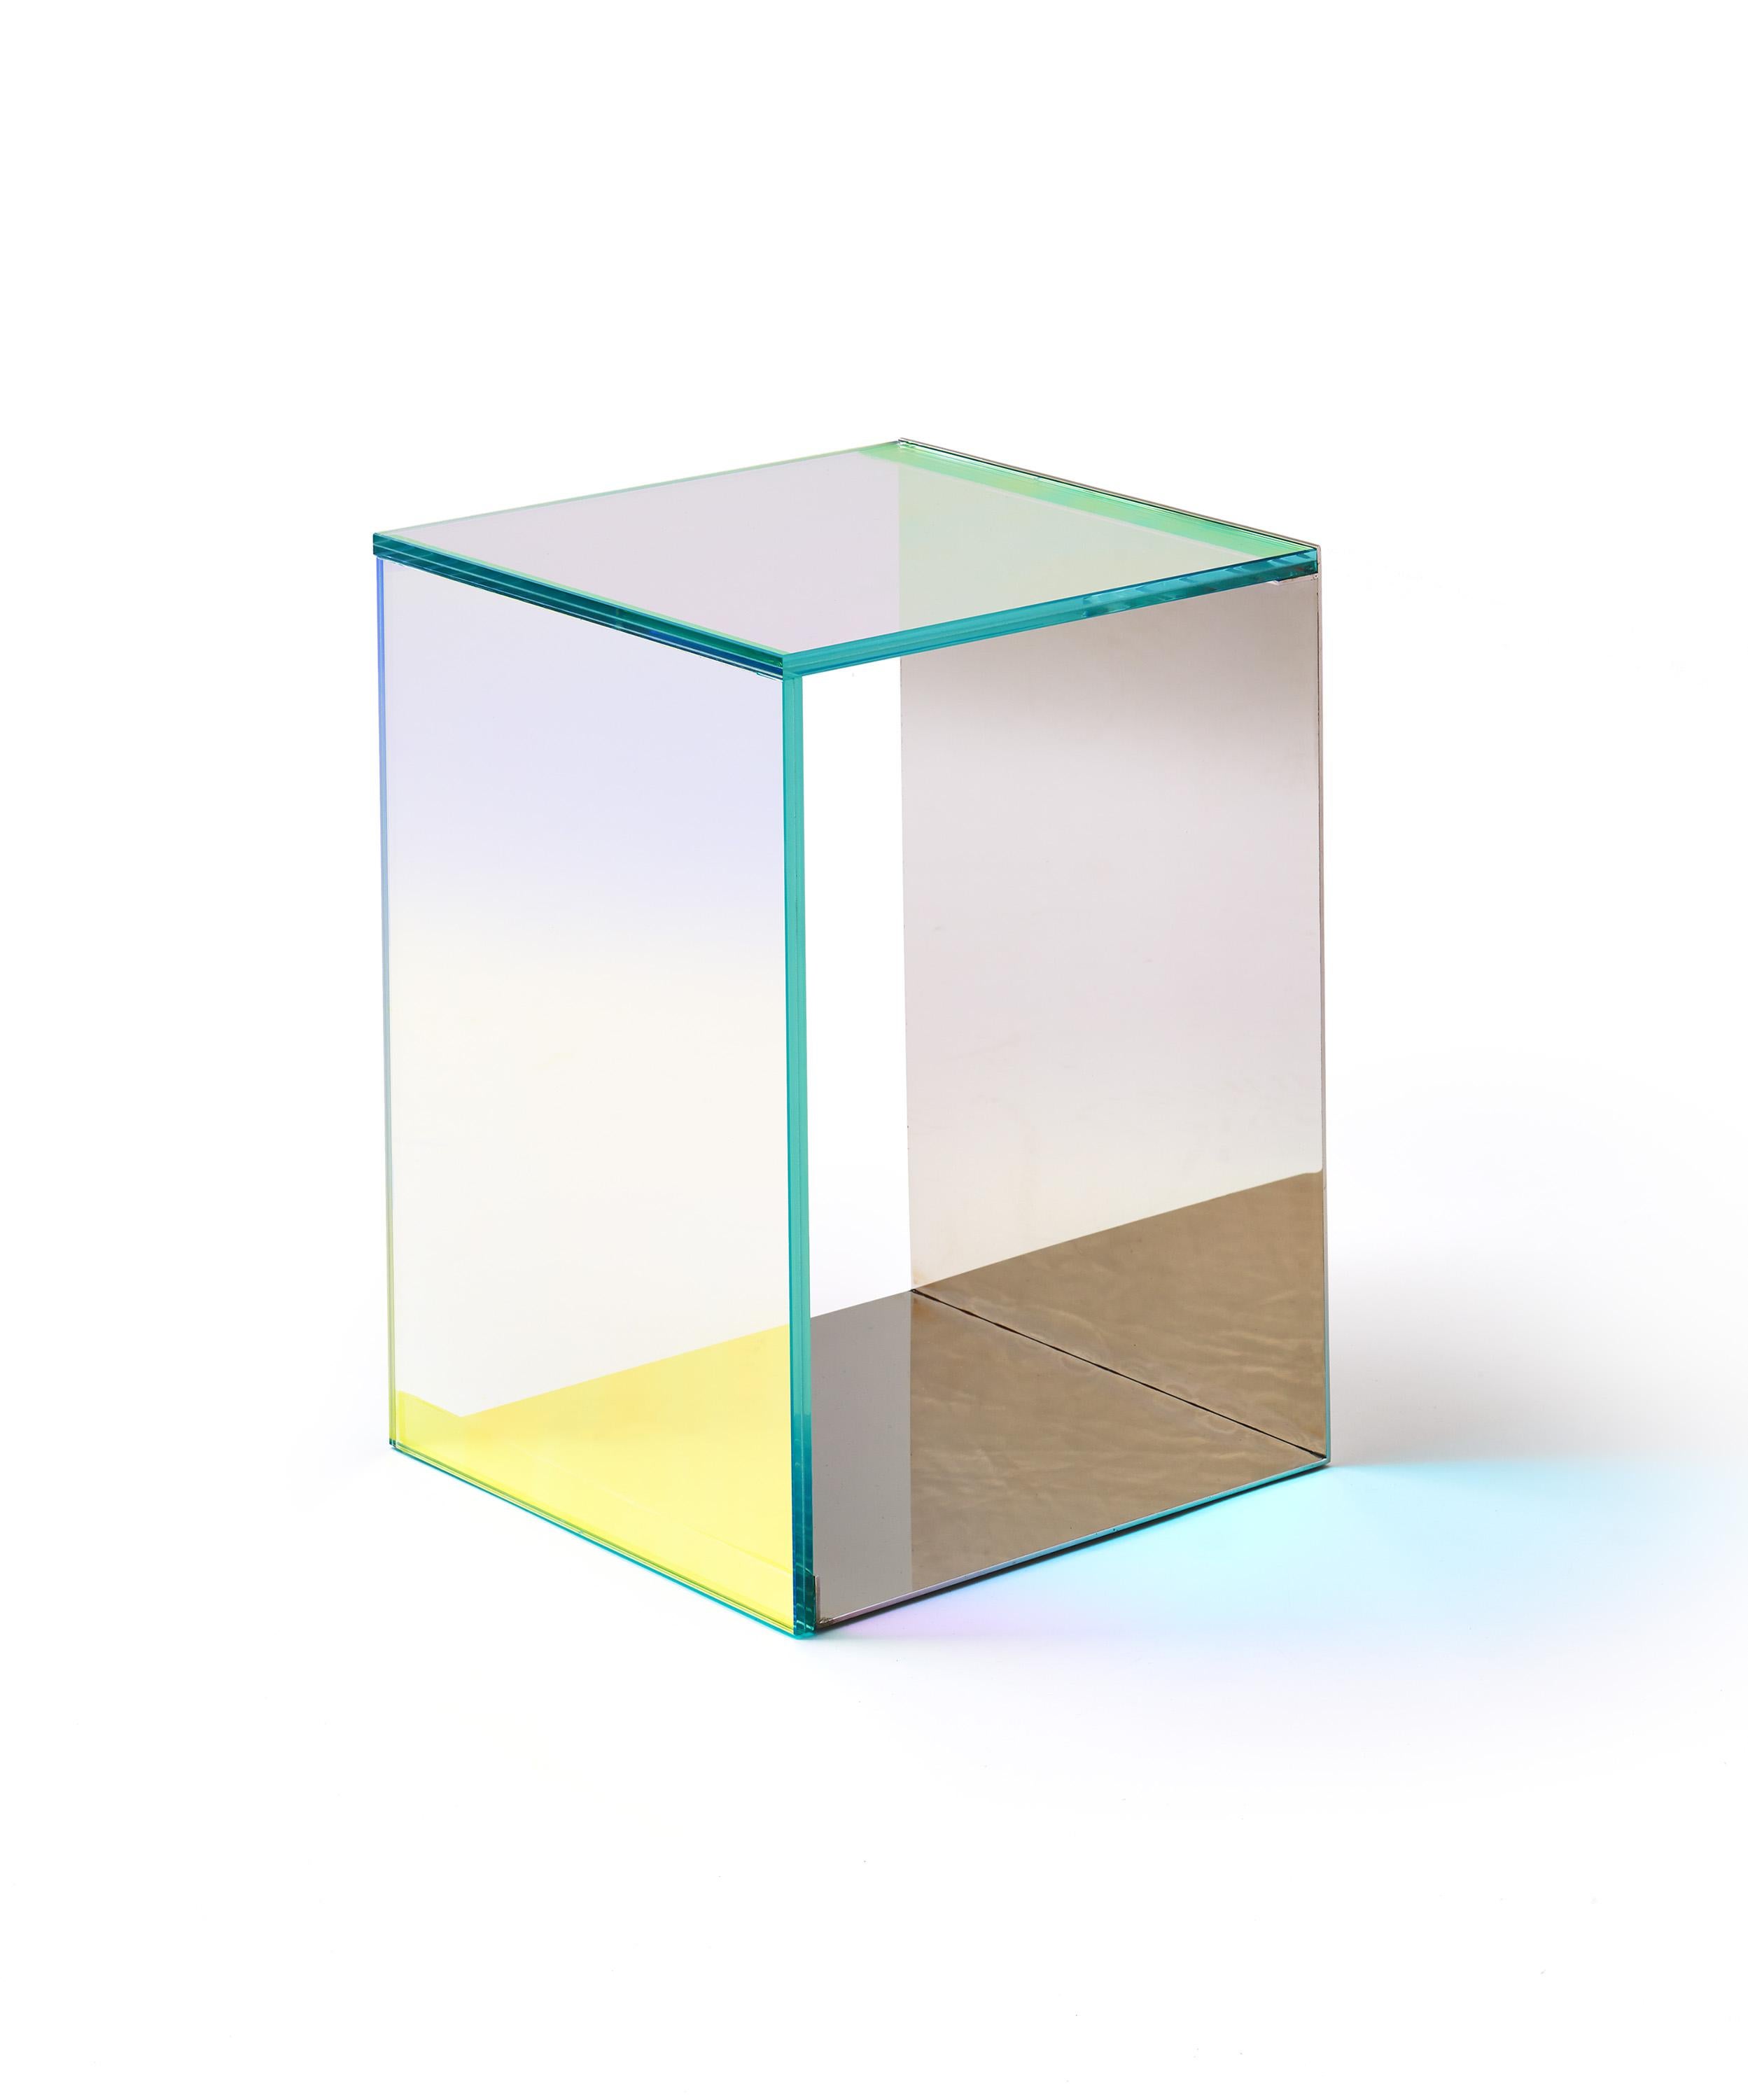 American Dichroic Tables, Light Refracting Glass and Polished Stainless Steel Side Table